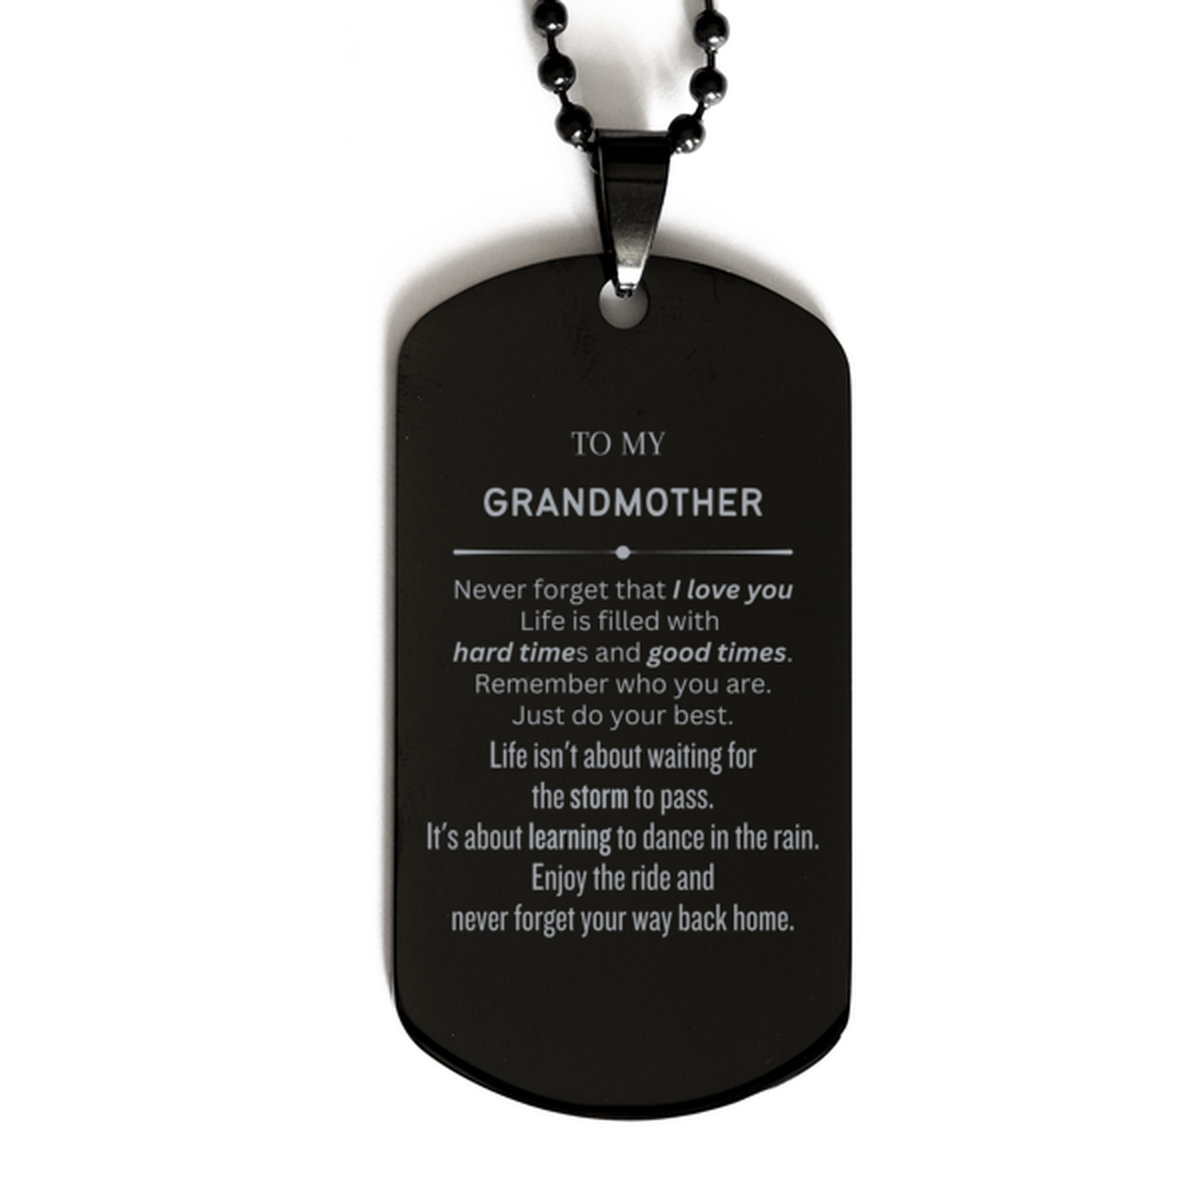 Christmas Grandmother Black Dog Tag Gifts, To My Grandmother Birthday Thank You Gifts For Grandmother, Graduation Unique Gifts For Grandmother To My Grandmother Never forget that I love you life is filled with hard times and good times. Remember who you a